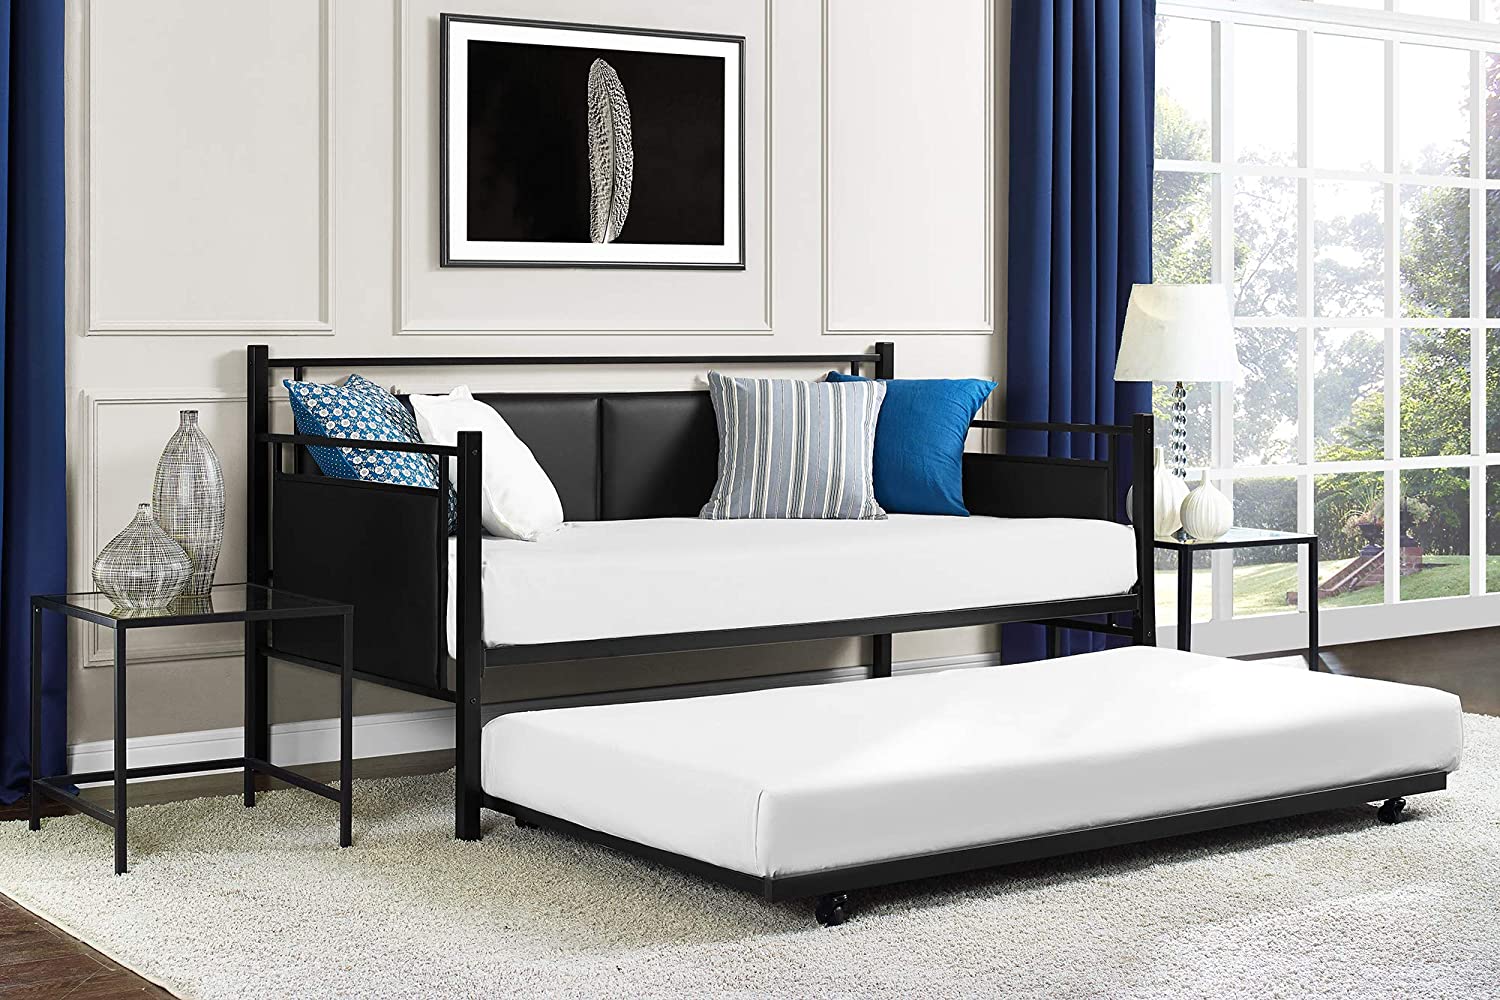 6. DHP Astoria Metal Daybed with Trundle